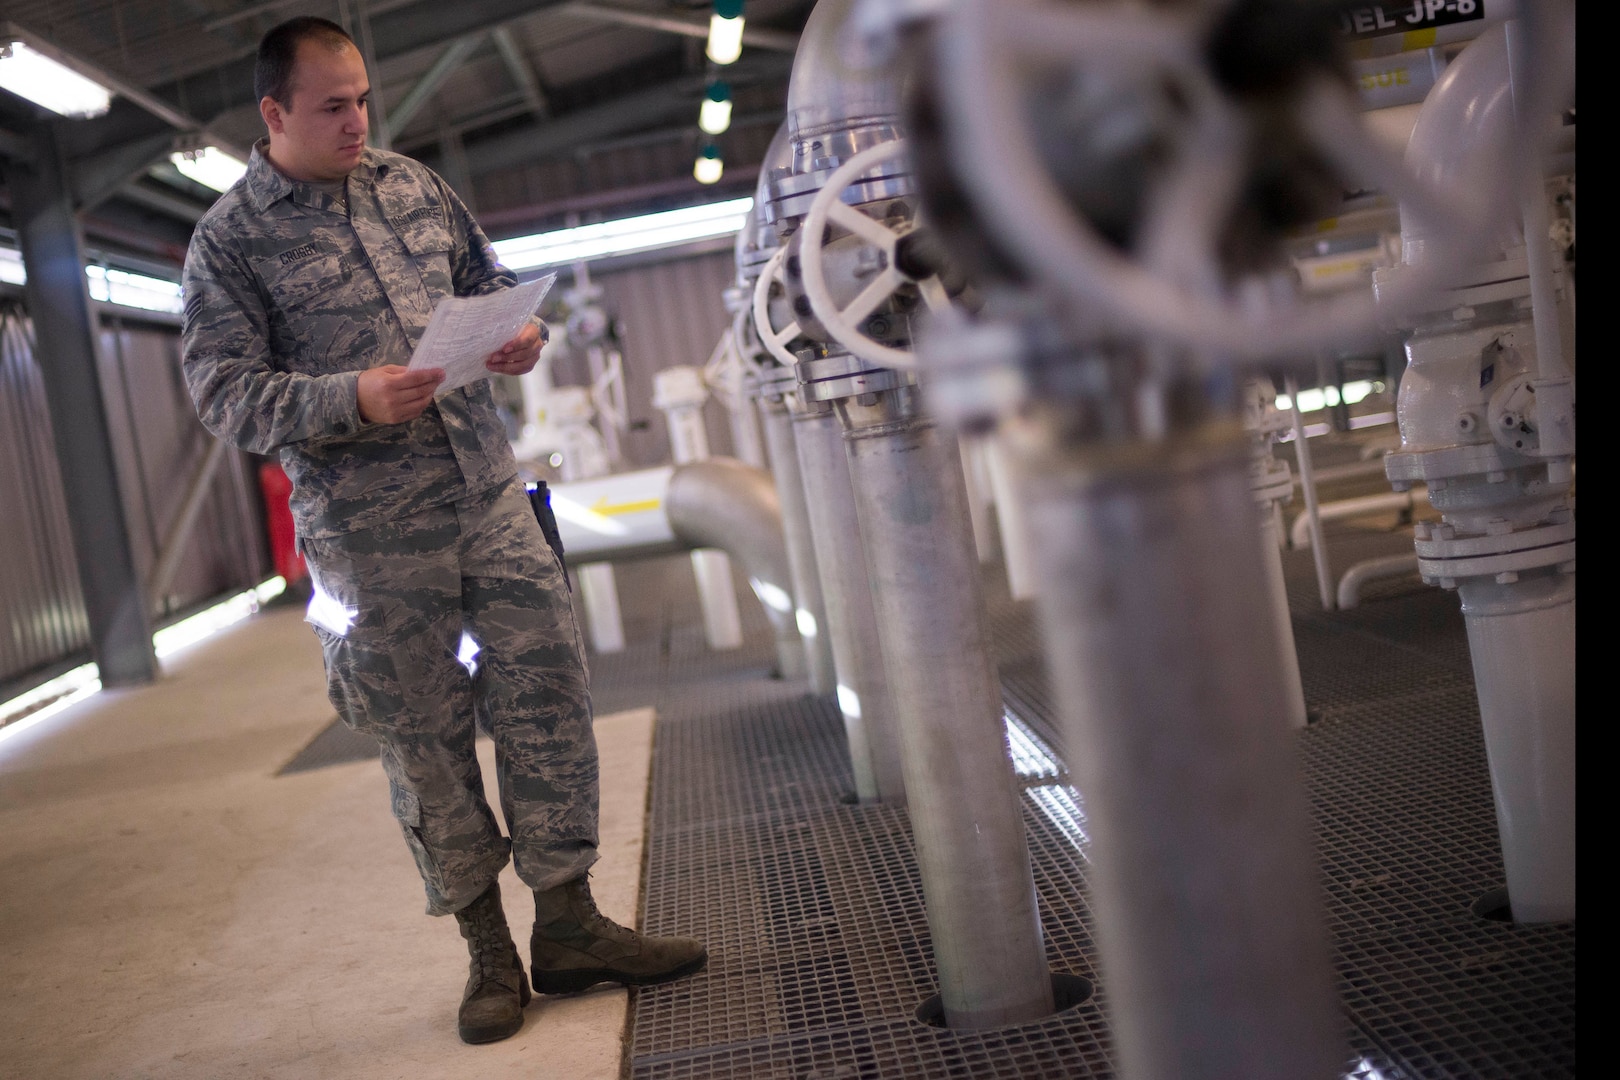 U.S. Air Force Senior Airman Christopher Crosby, 100th Logistics Readiness Squadron Fuels Facilities operator, checks system valve configuration at RAF Mildenhall, England, Oct. 9, 2018. Fuels facilities Airmen complete daily, weekly and monthly checks to fuels facilities and equipment. (U.S. Air Force photo by Staff Sgt. Christine Groening)